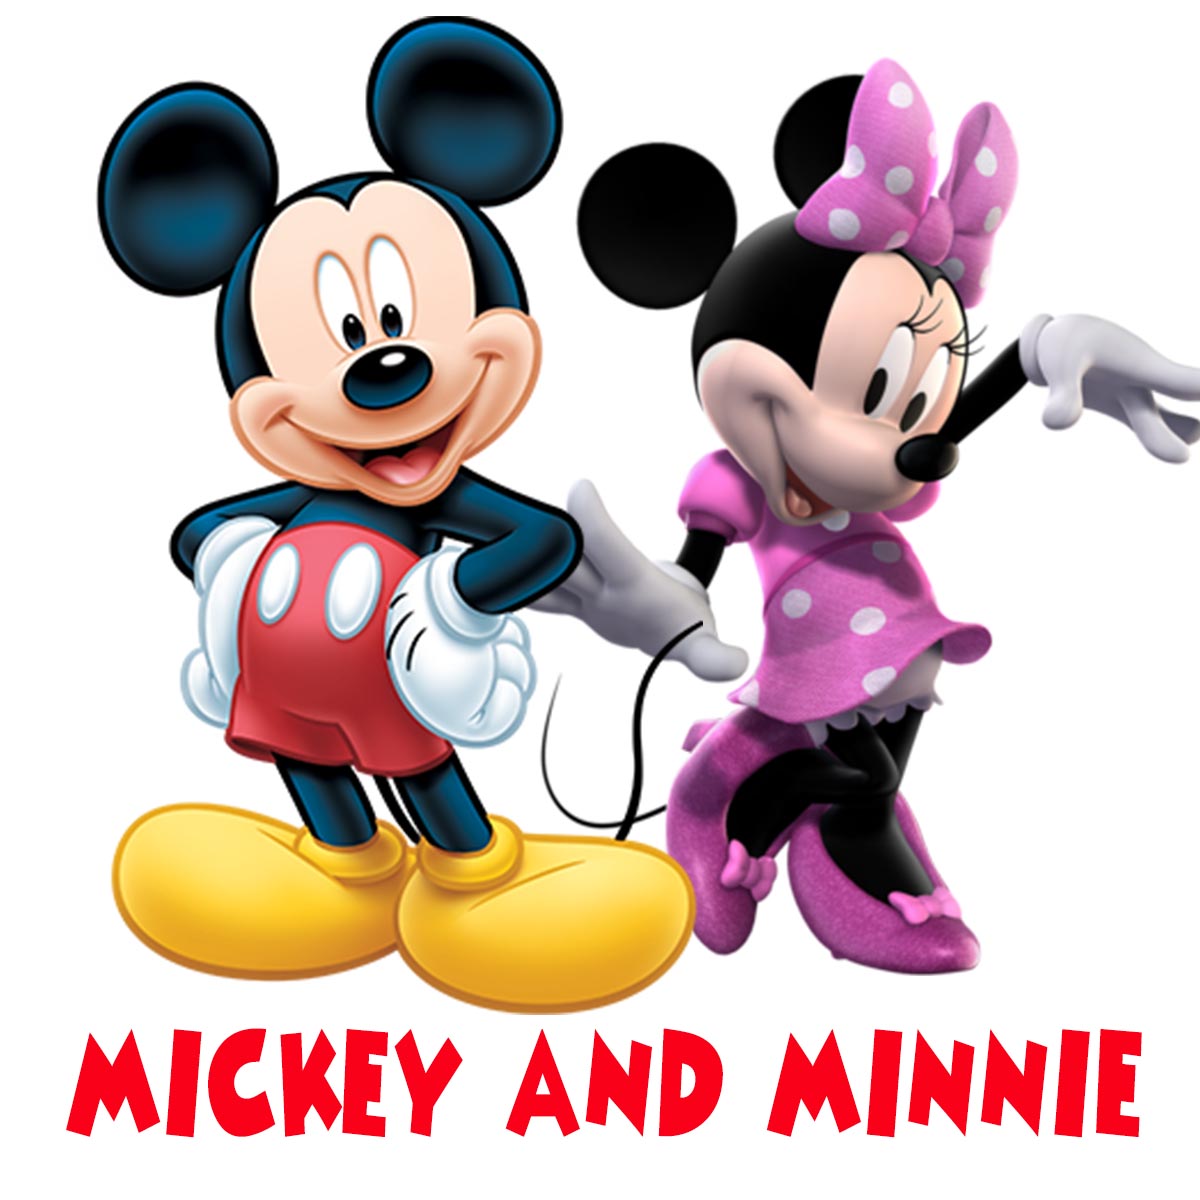 MICKEY AND MINNIE PARTY PRINTABLES